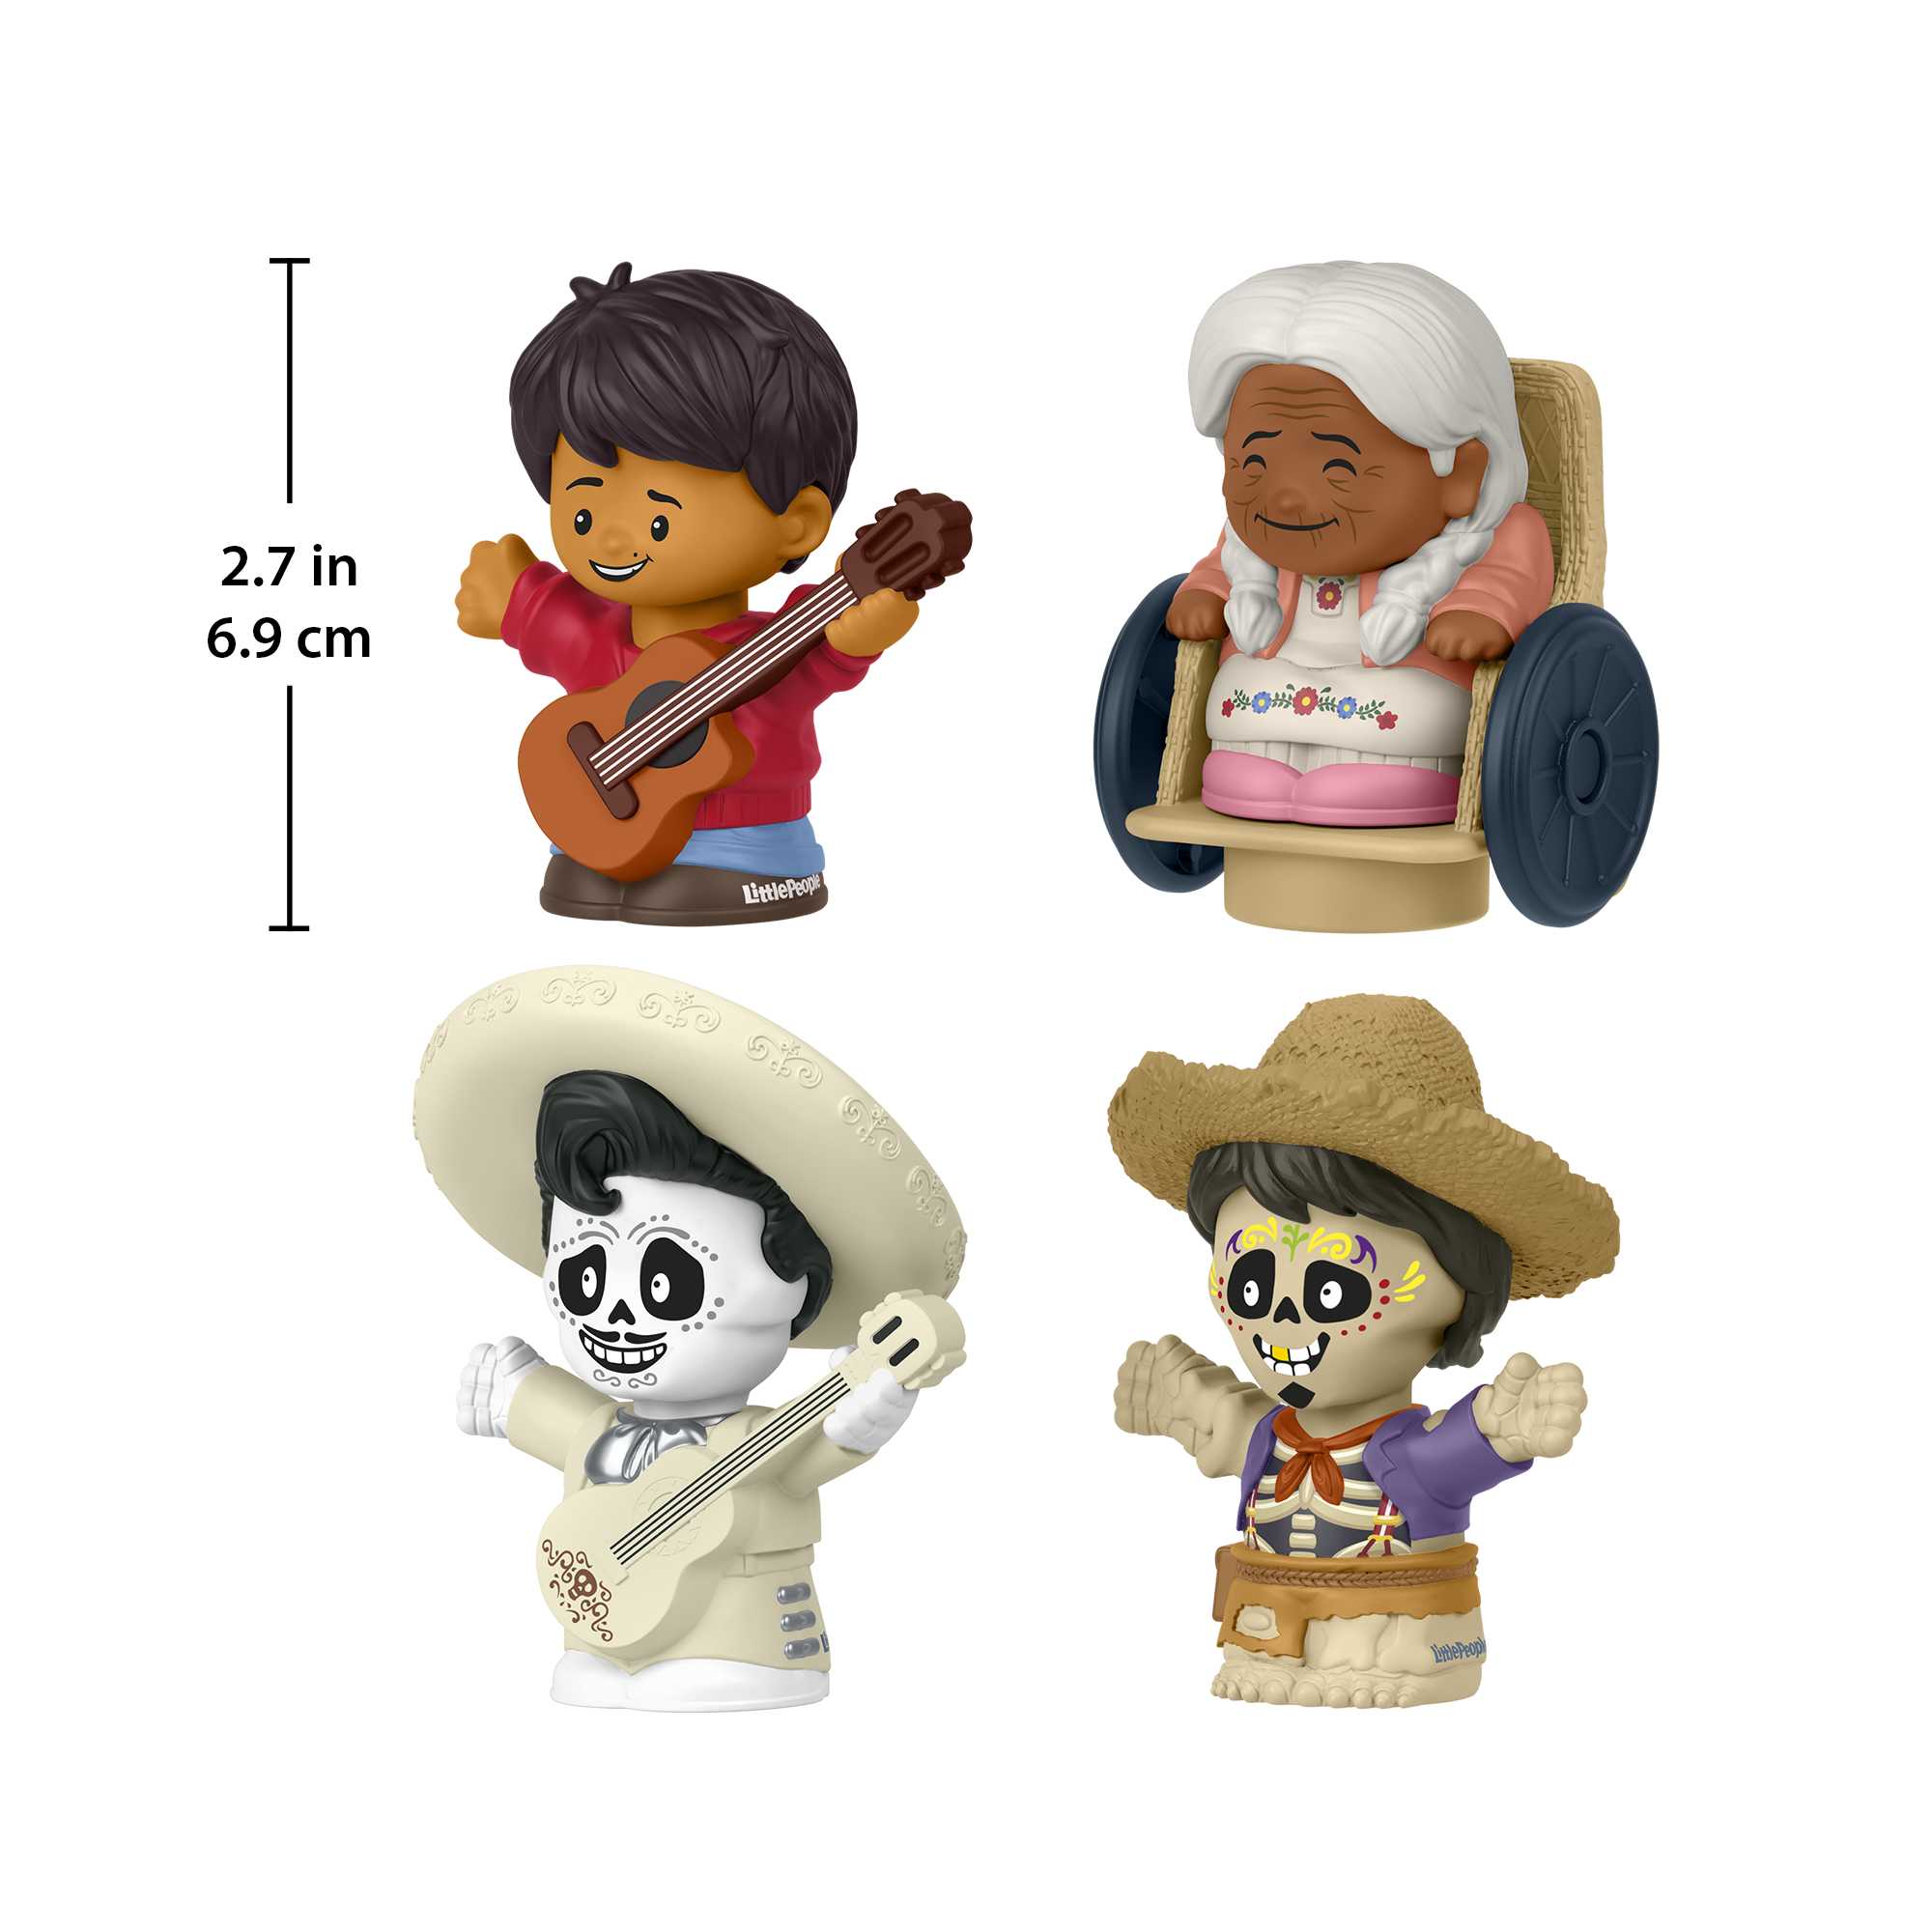 Disney and Pixar Coco Figure Pack by Little People®